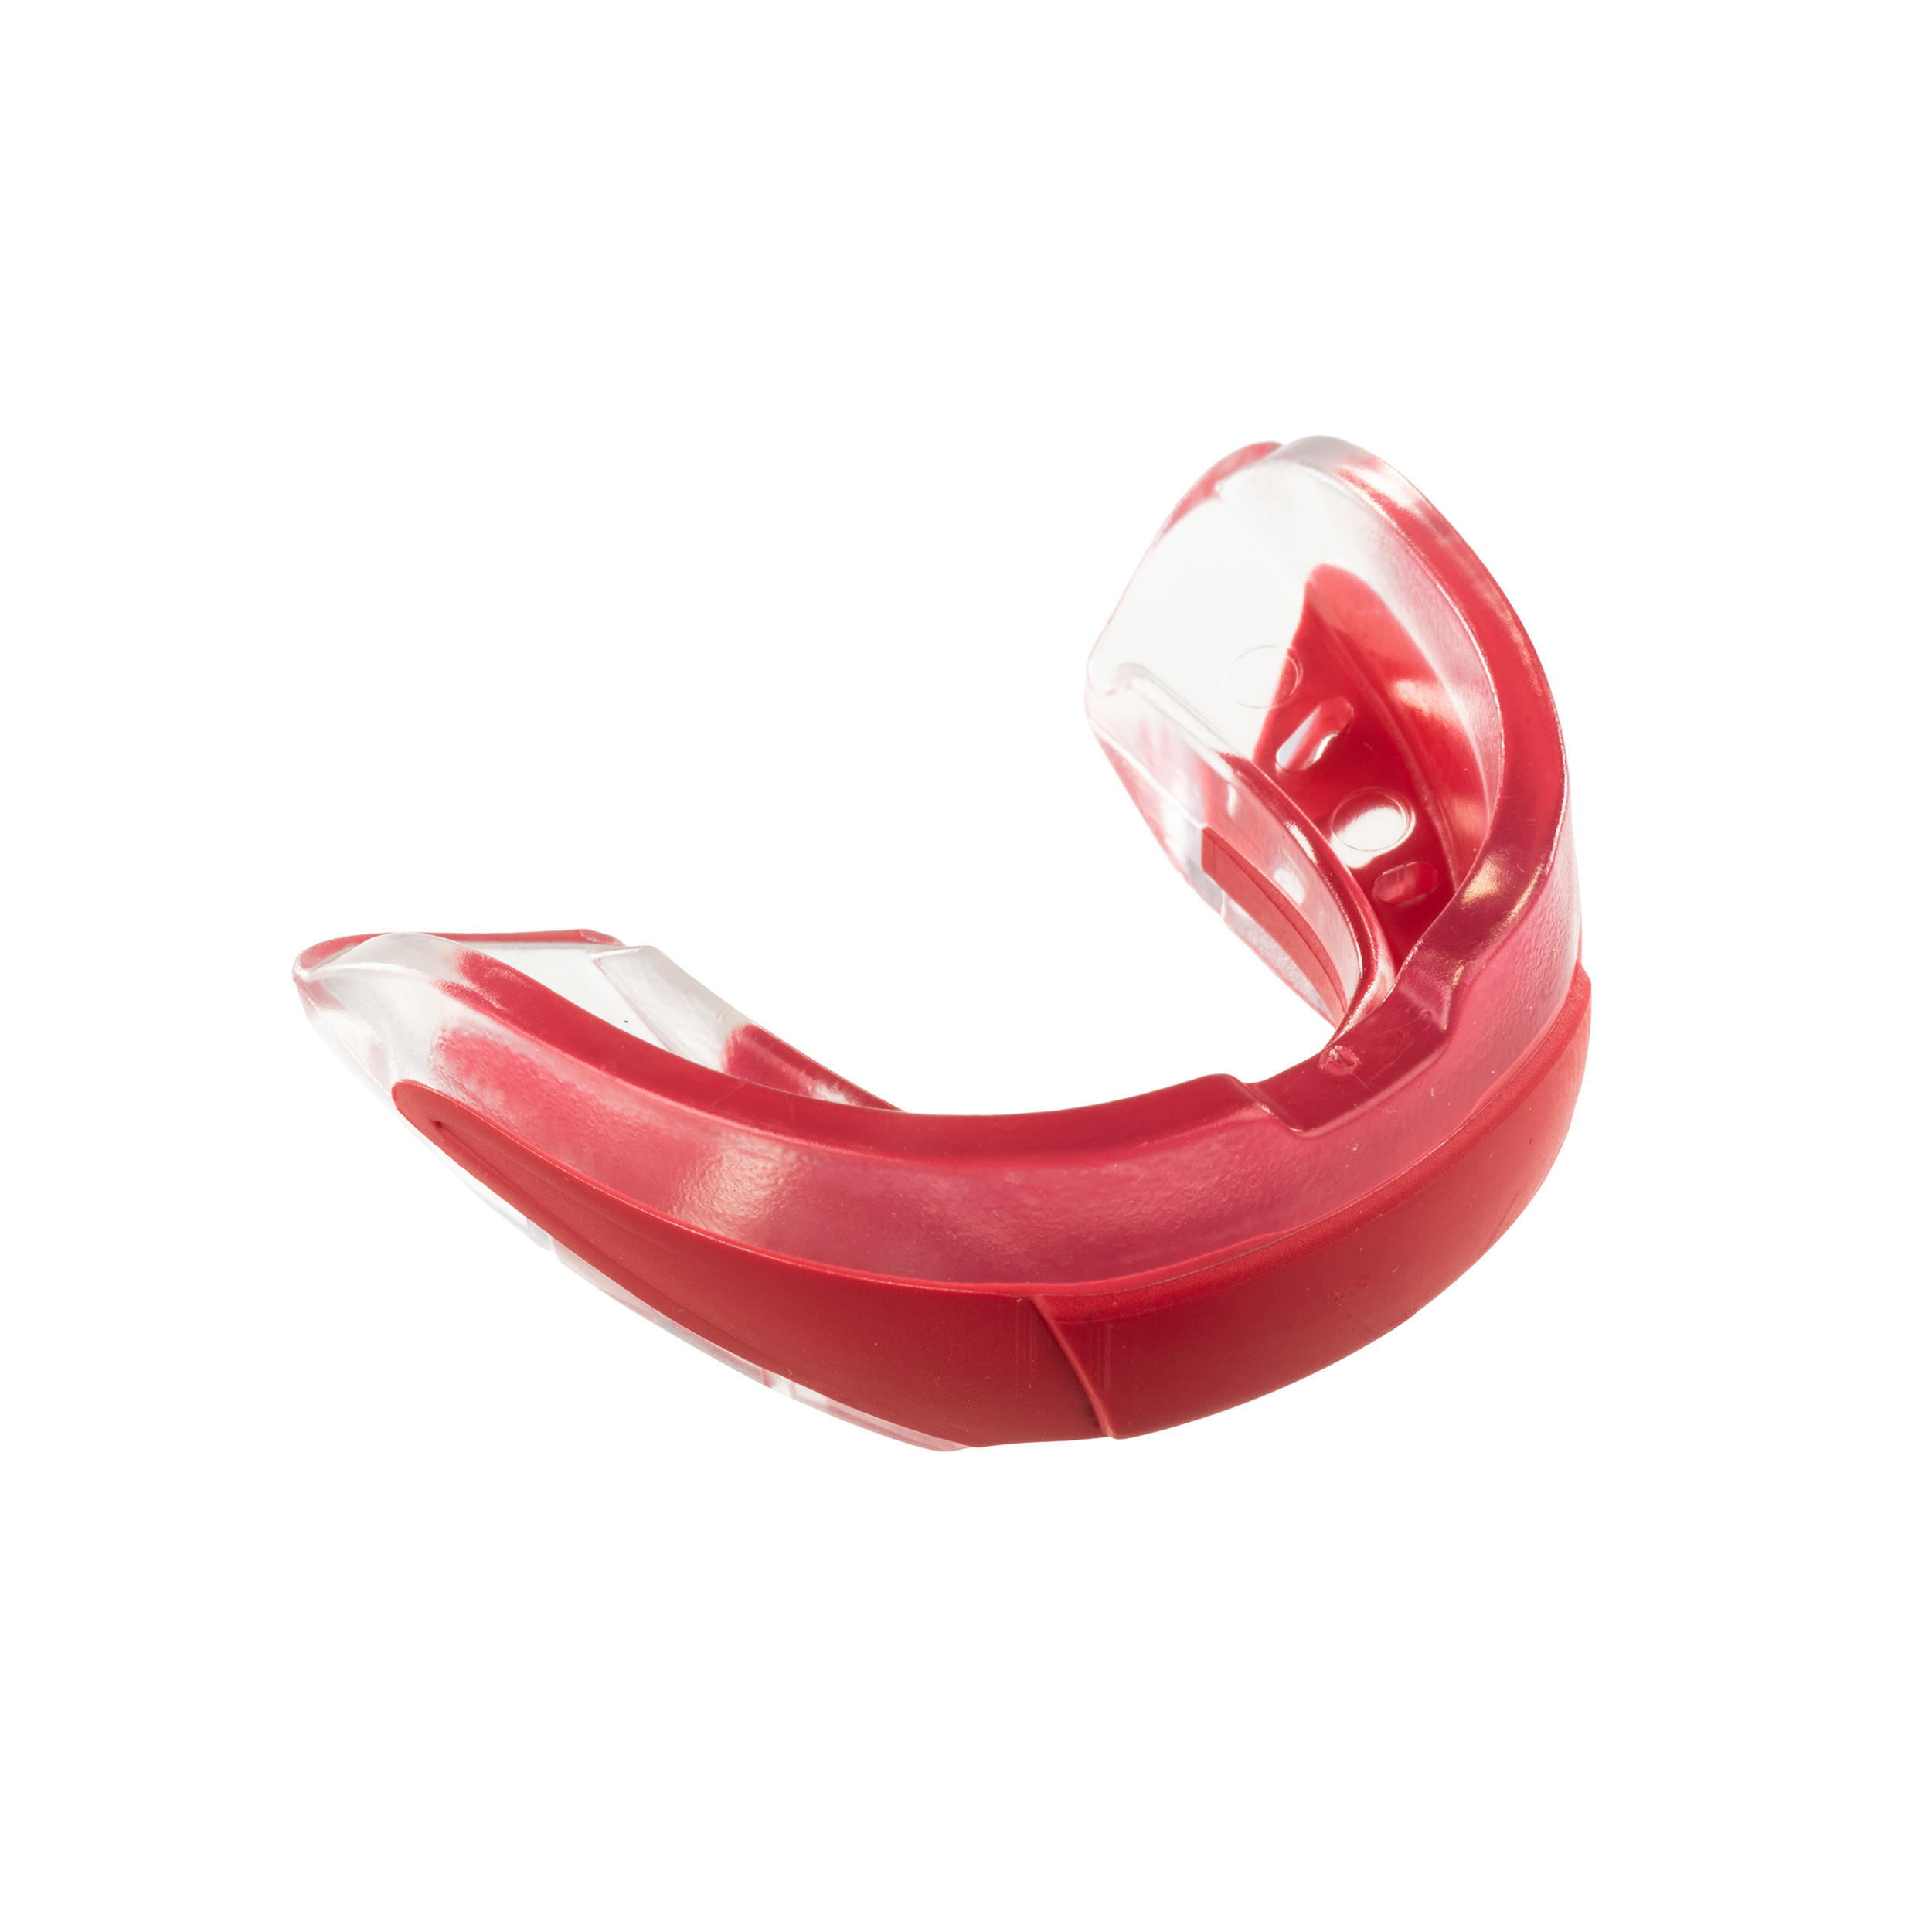 OFFLOAD Rugby Mouthguard R500 Size S (Players Up To 1.40 m) - Red